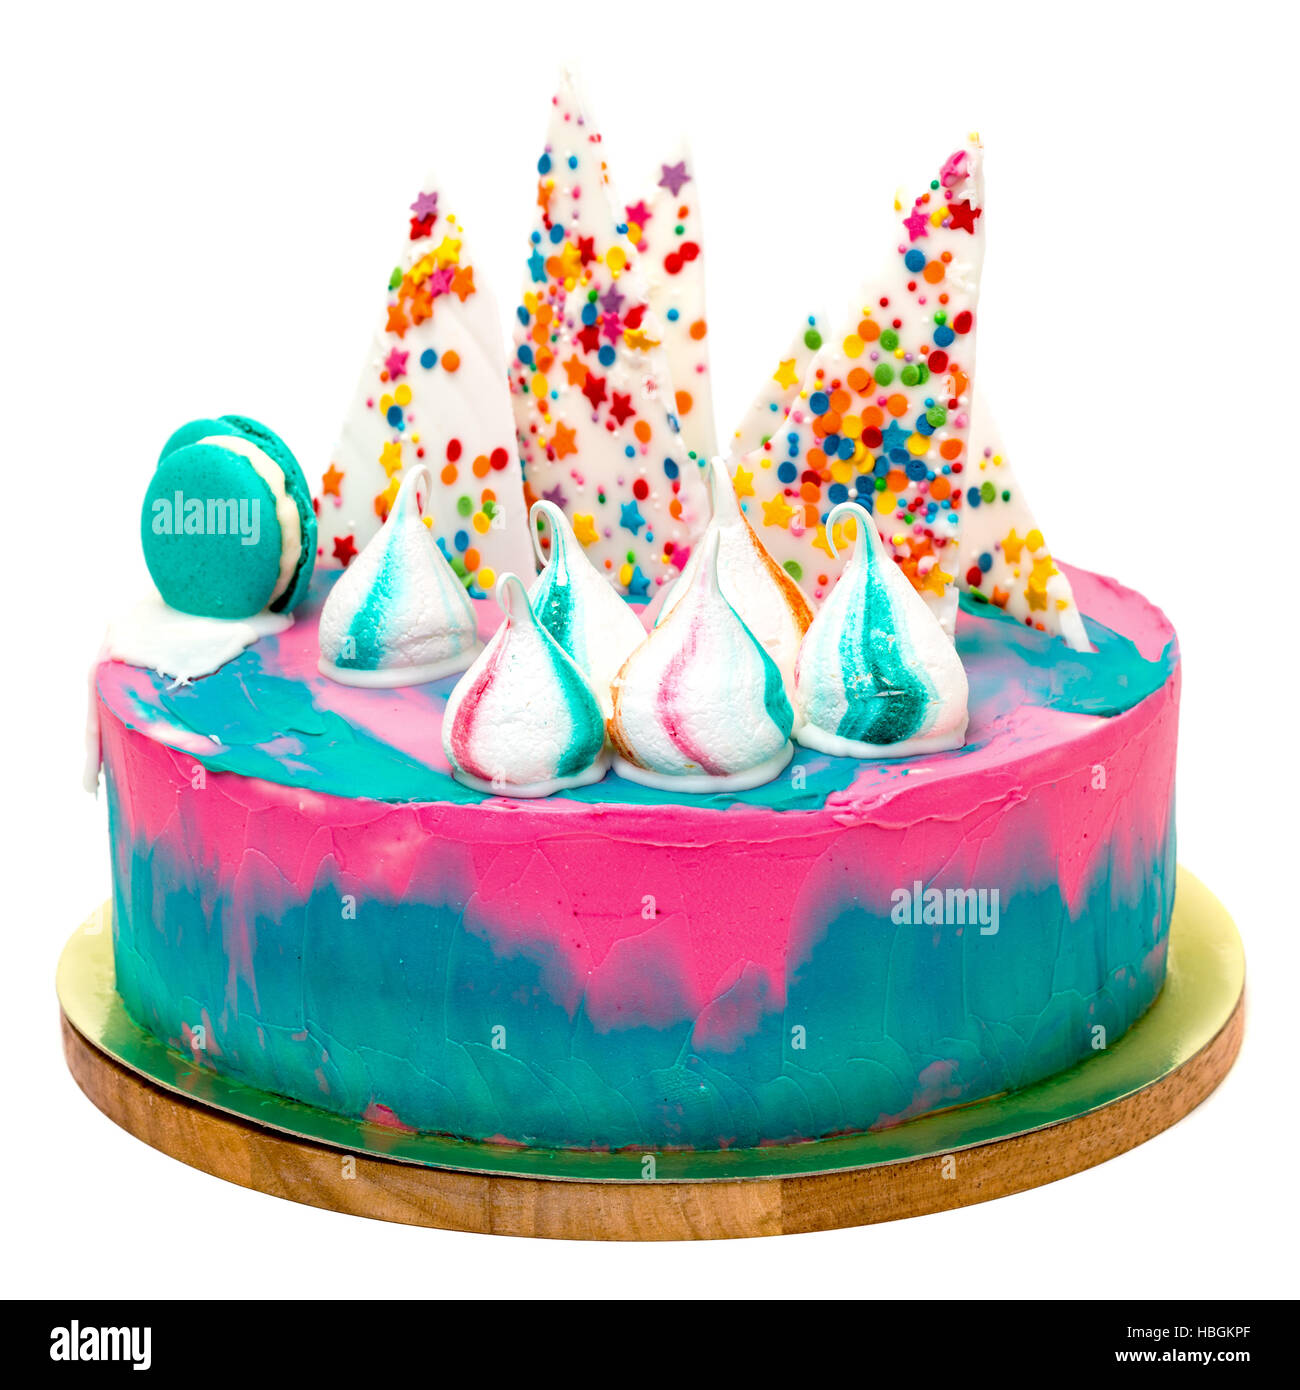 Birthday Vibrant Cake with Colorful Sprinkles Stock Photo